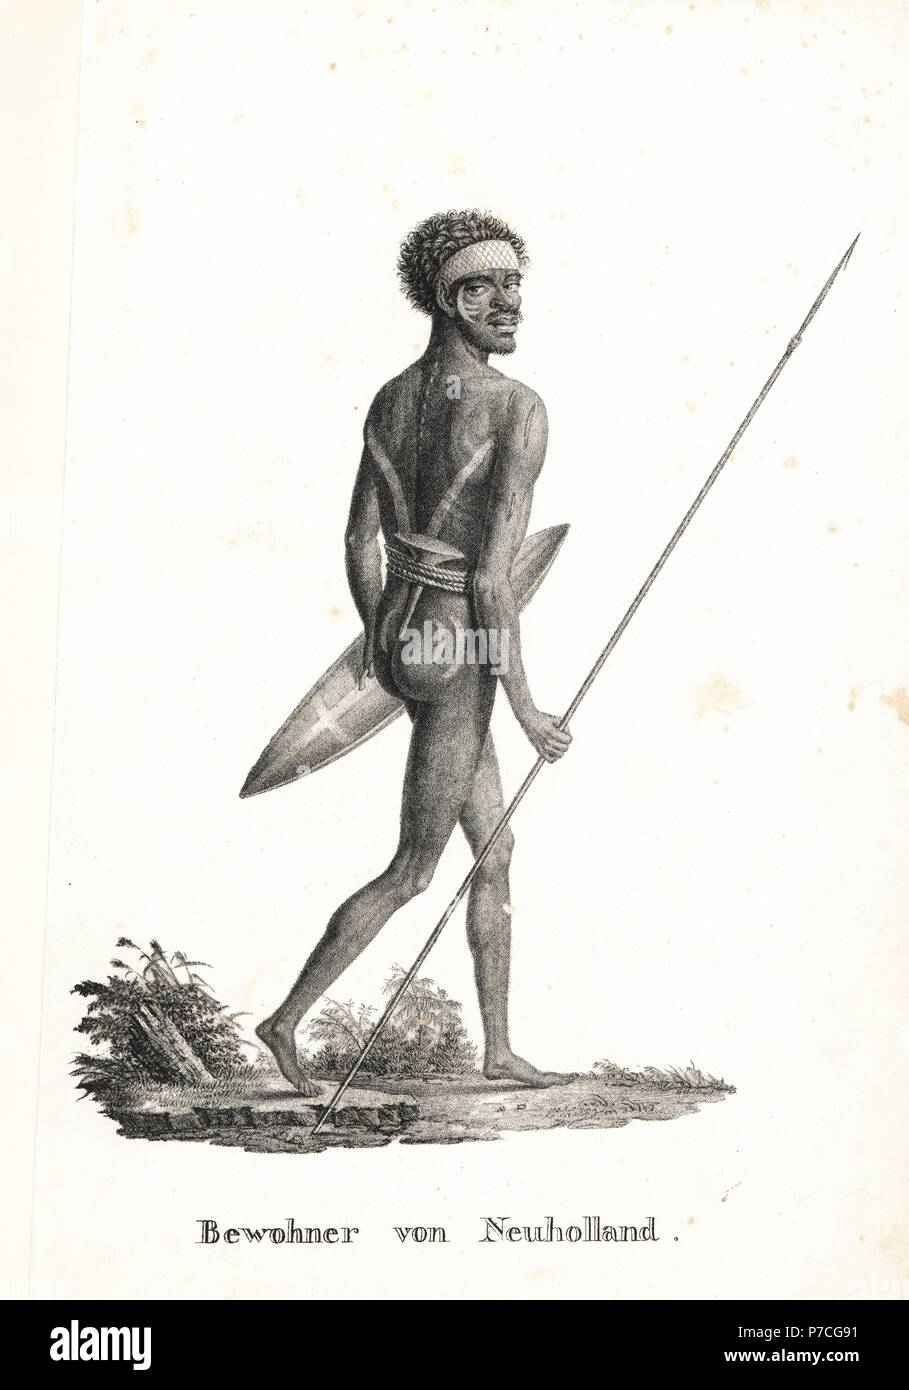 Noru Gal Derri, Aborigine warrior with spear and shield, Australia. From an illustration by Nicolas Martin Petit. Lithograph by Karl Joseph Brodtmann from Heinrich Rudolf Schinz's Illustrated Natural History of Men and Animals, 1836. Stock Photo